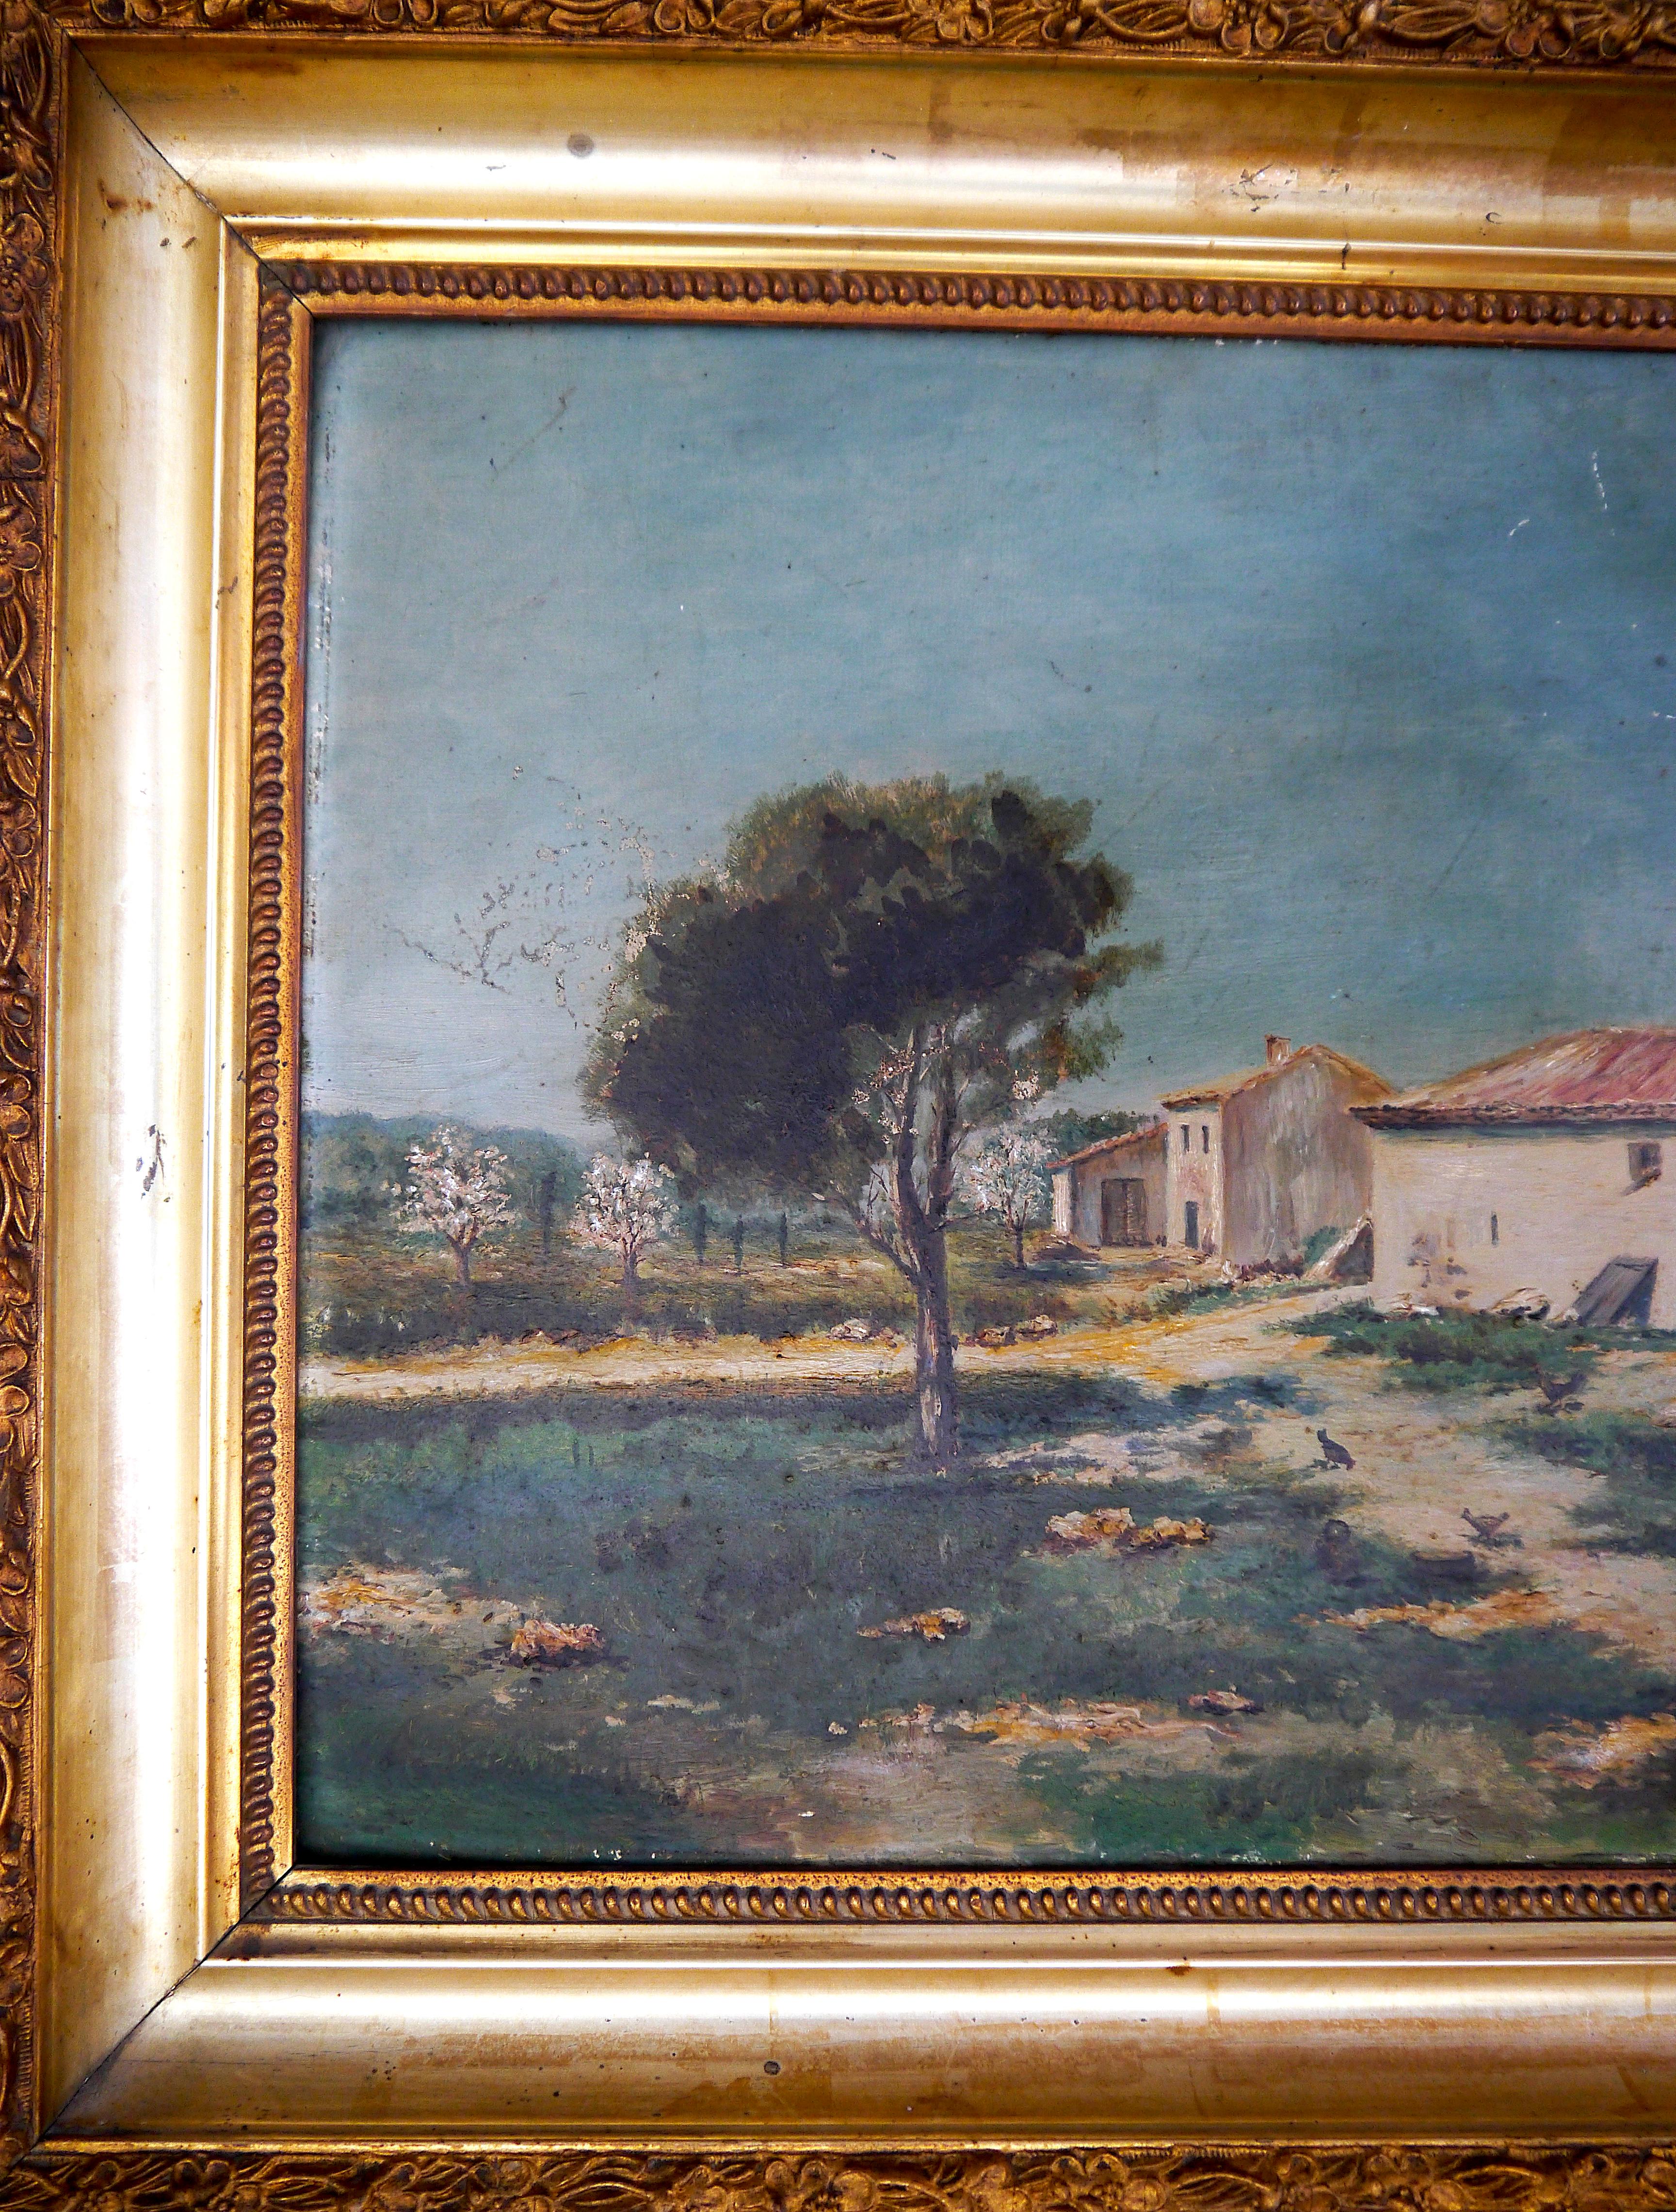 Landscape in Provence. 

Typical farm in Provence with flat roof. 

Structural Analysis :
On the left side,  a composition of trees painted with a heavy and thick texture (such as Impressionist painters)
On the right side, there is a serie of houses